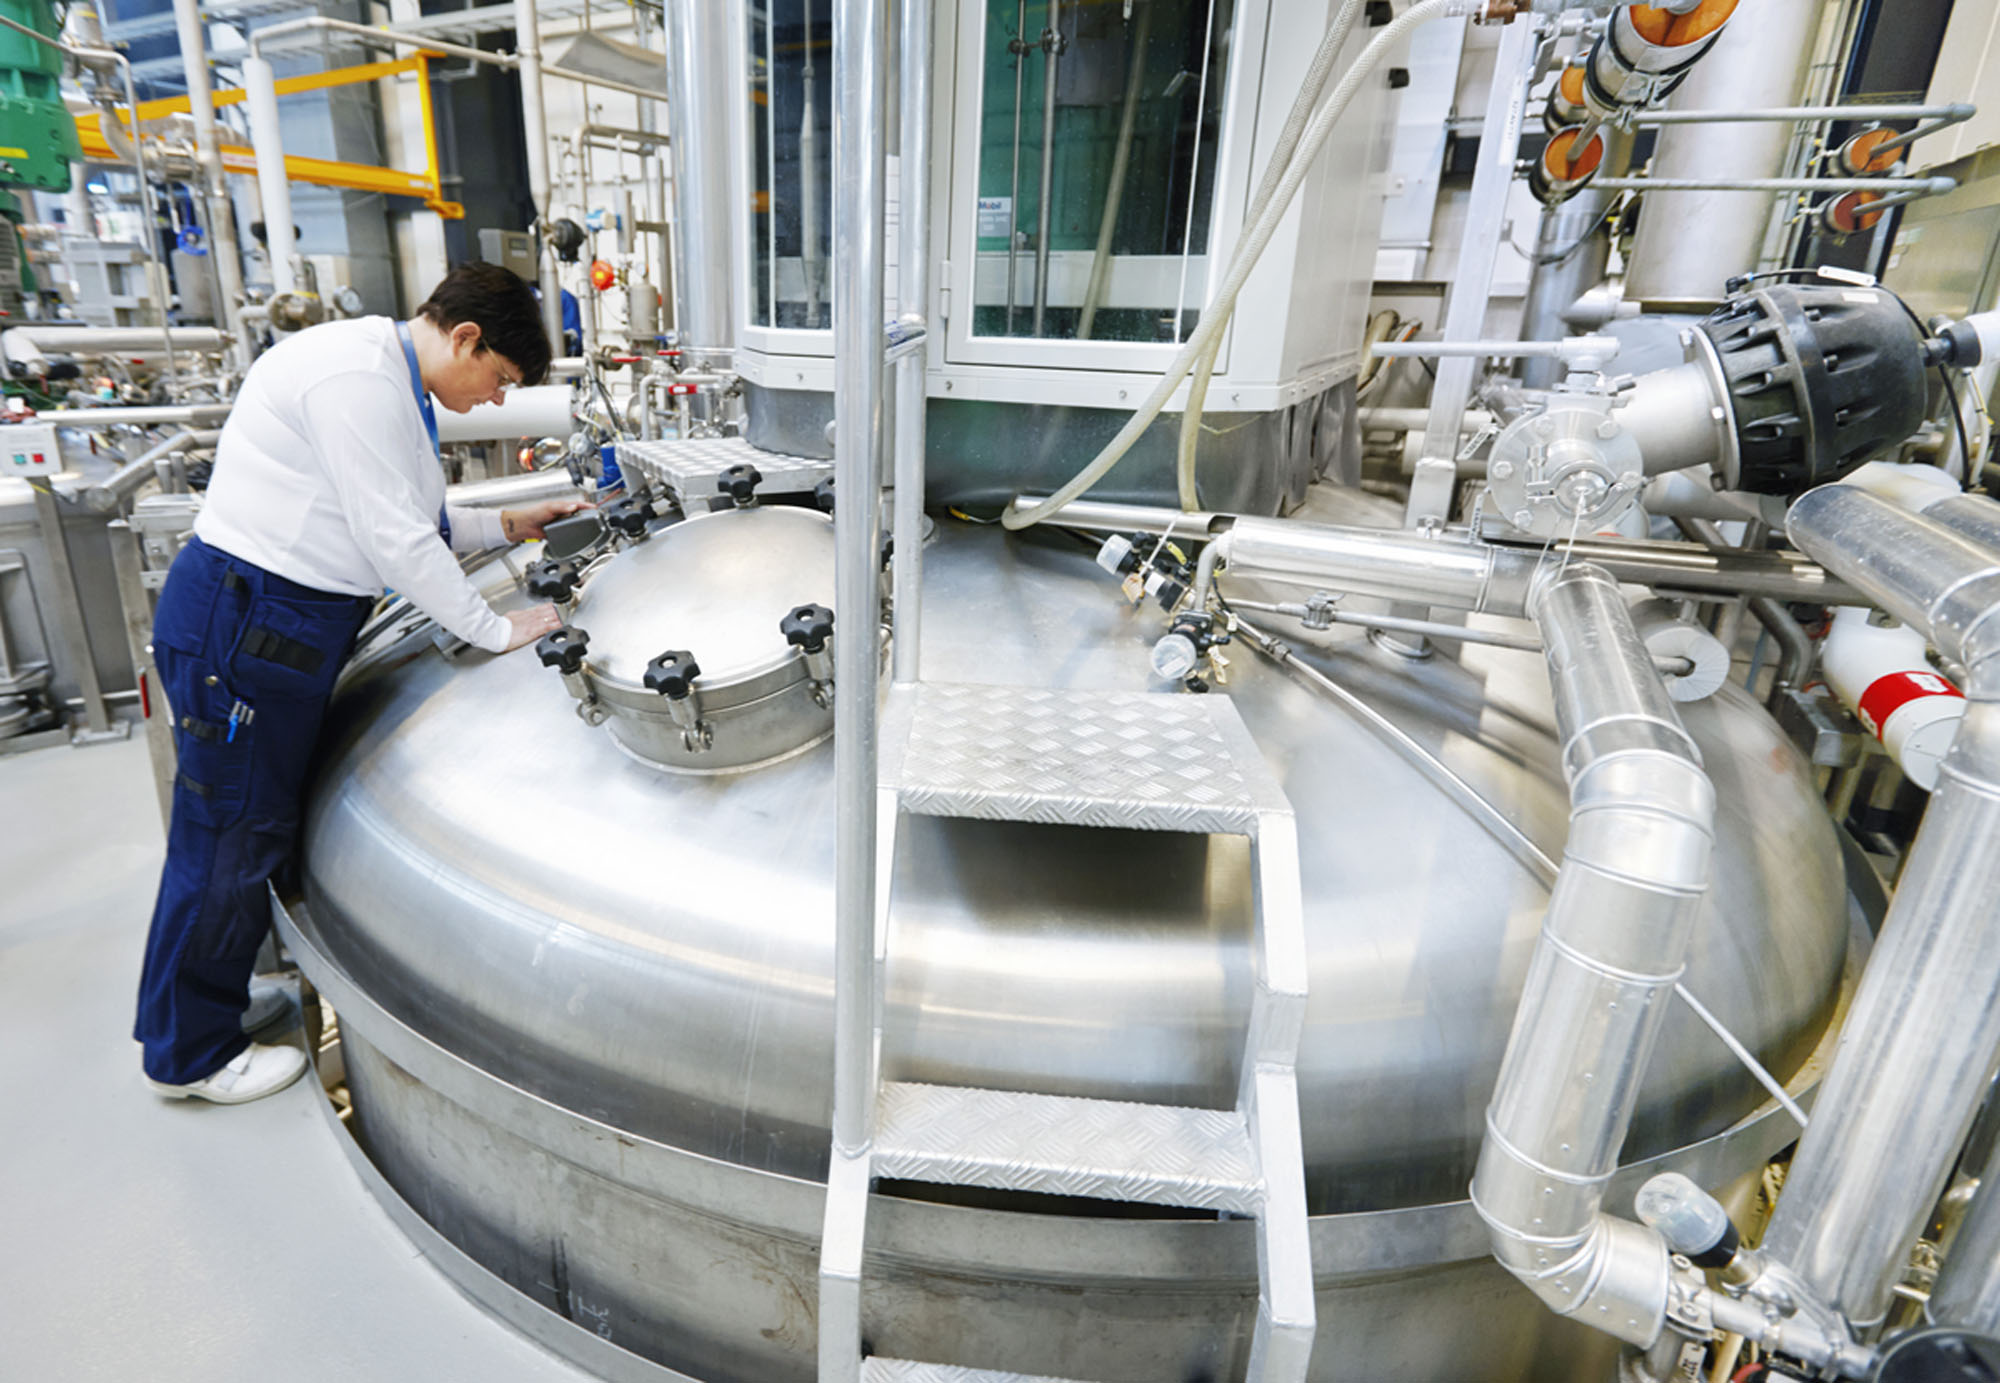 An operator inspects production at the Kalundborg Novo Nordisk A/S insulin production facility in Denmark. Source: Novo Nordisk A/S via Bloomberg
